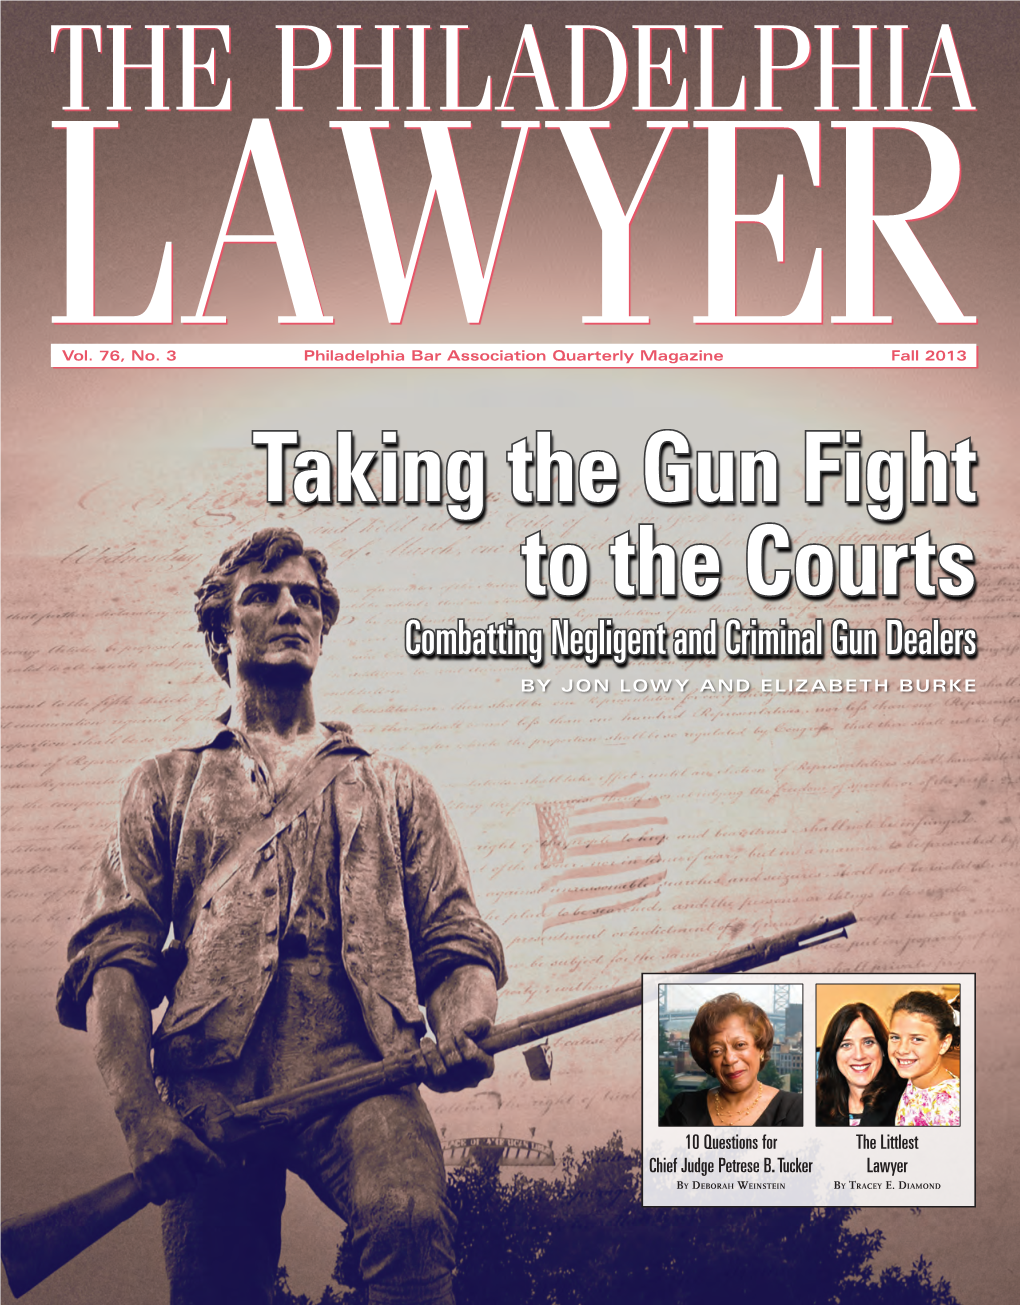 Taking the Gun Fight to the Courts Combatting Negligent and Criminal Gun Dealers by Jon Lowy and Elizabeth Burke